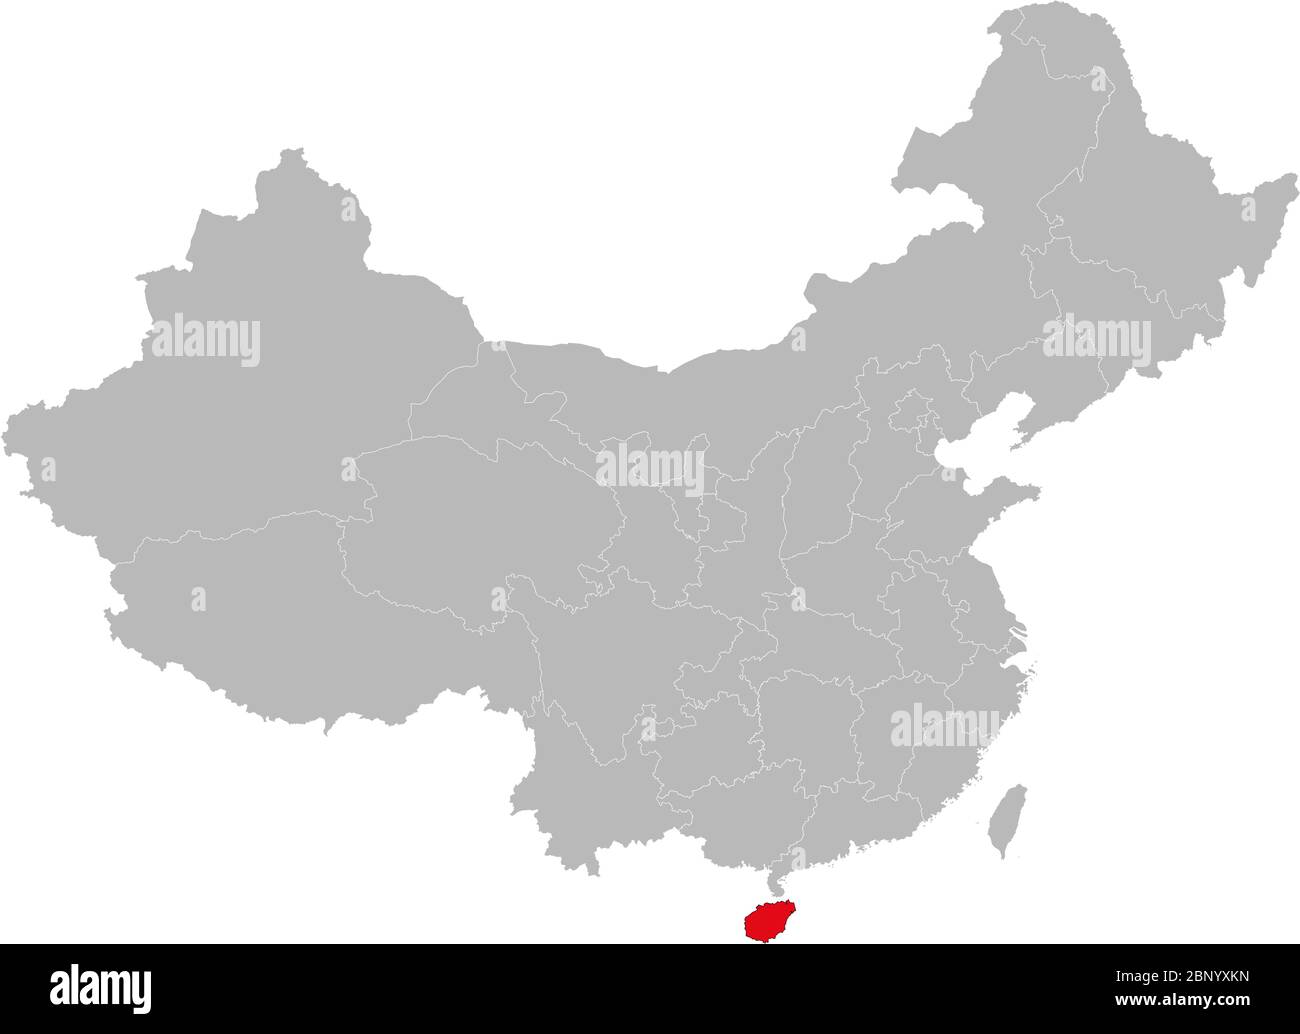 Hainan province highlighted on china map. Gray background. Stock Vector